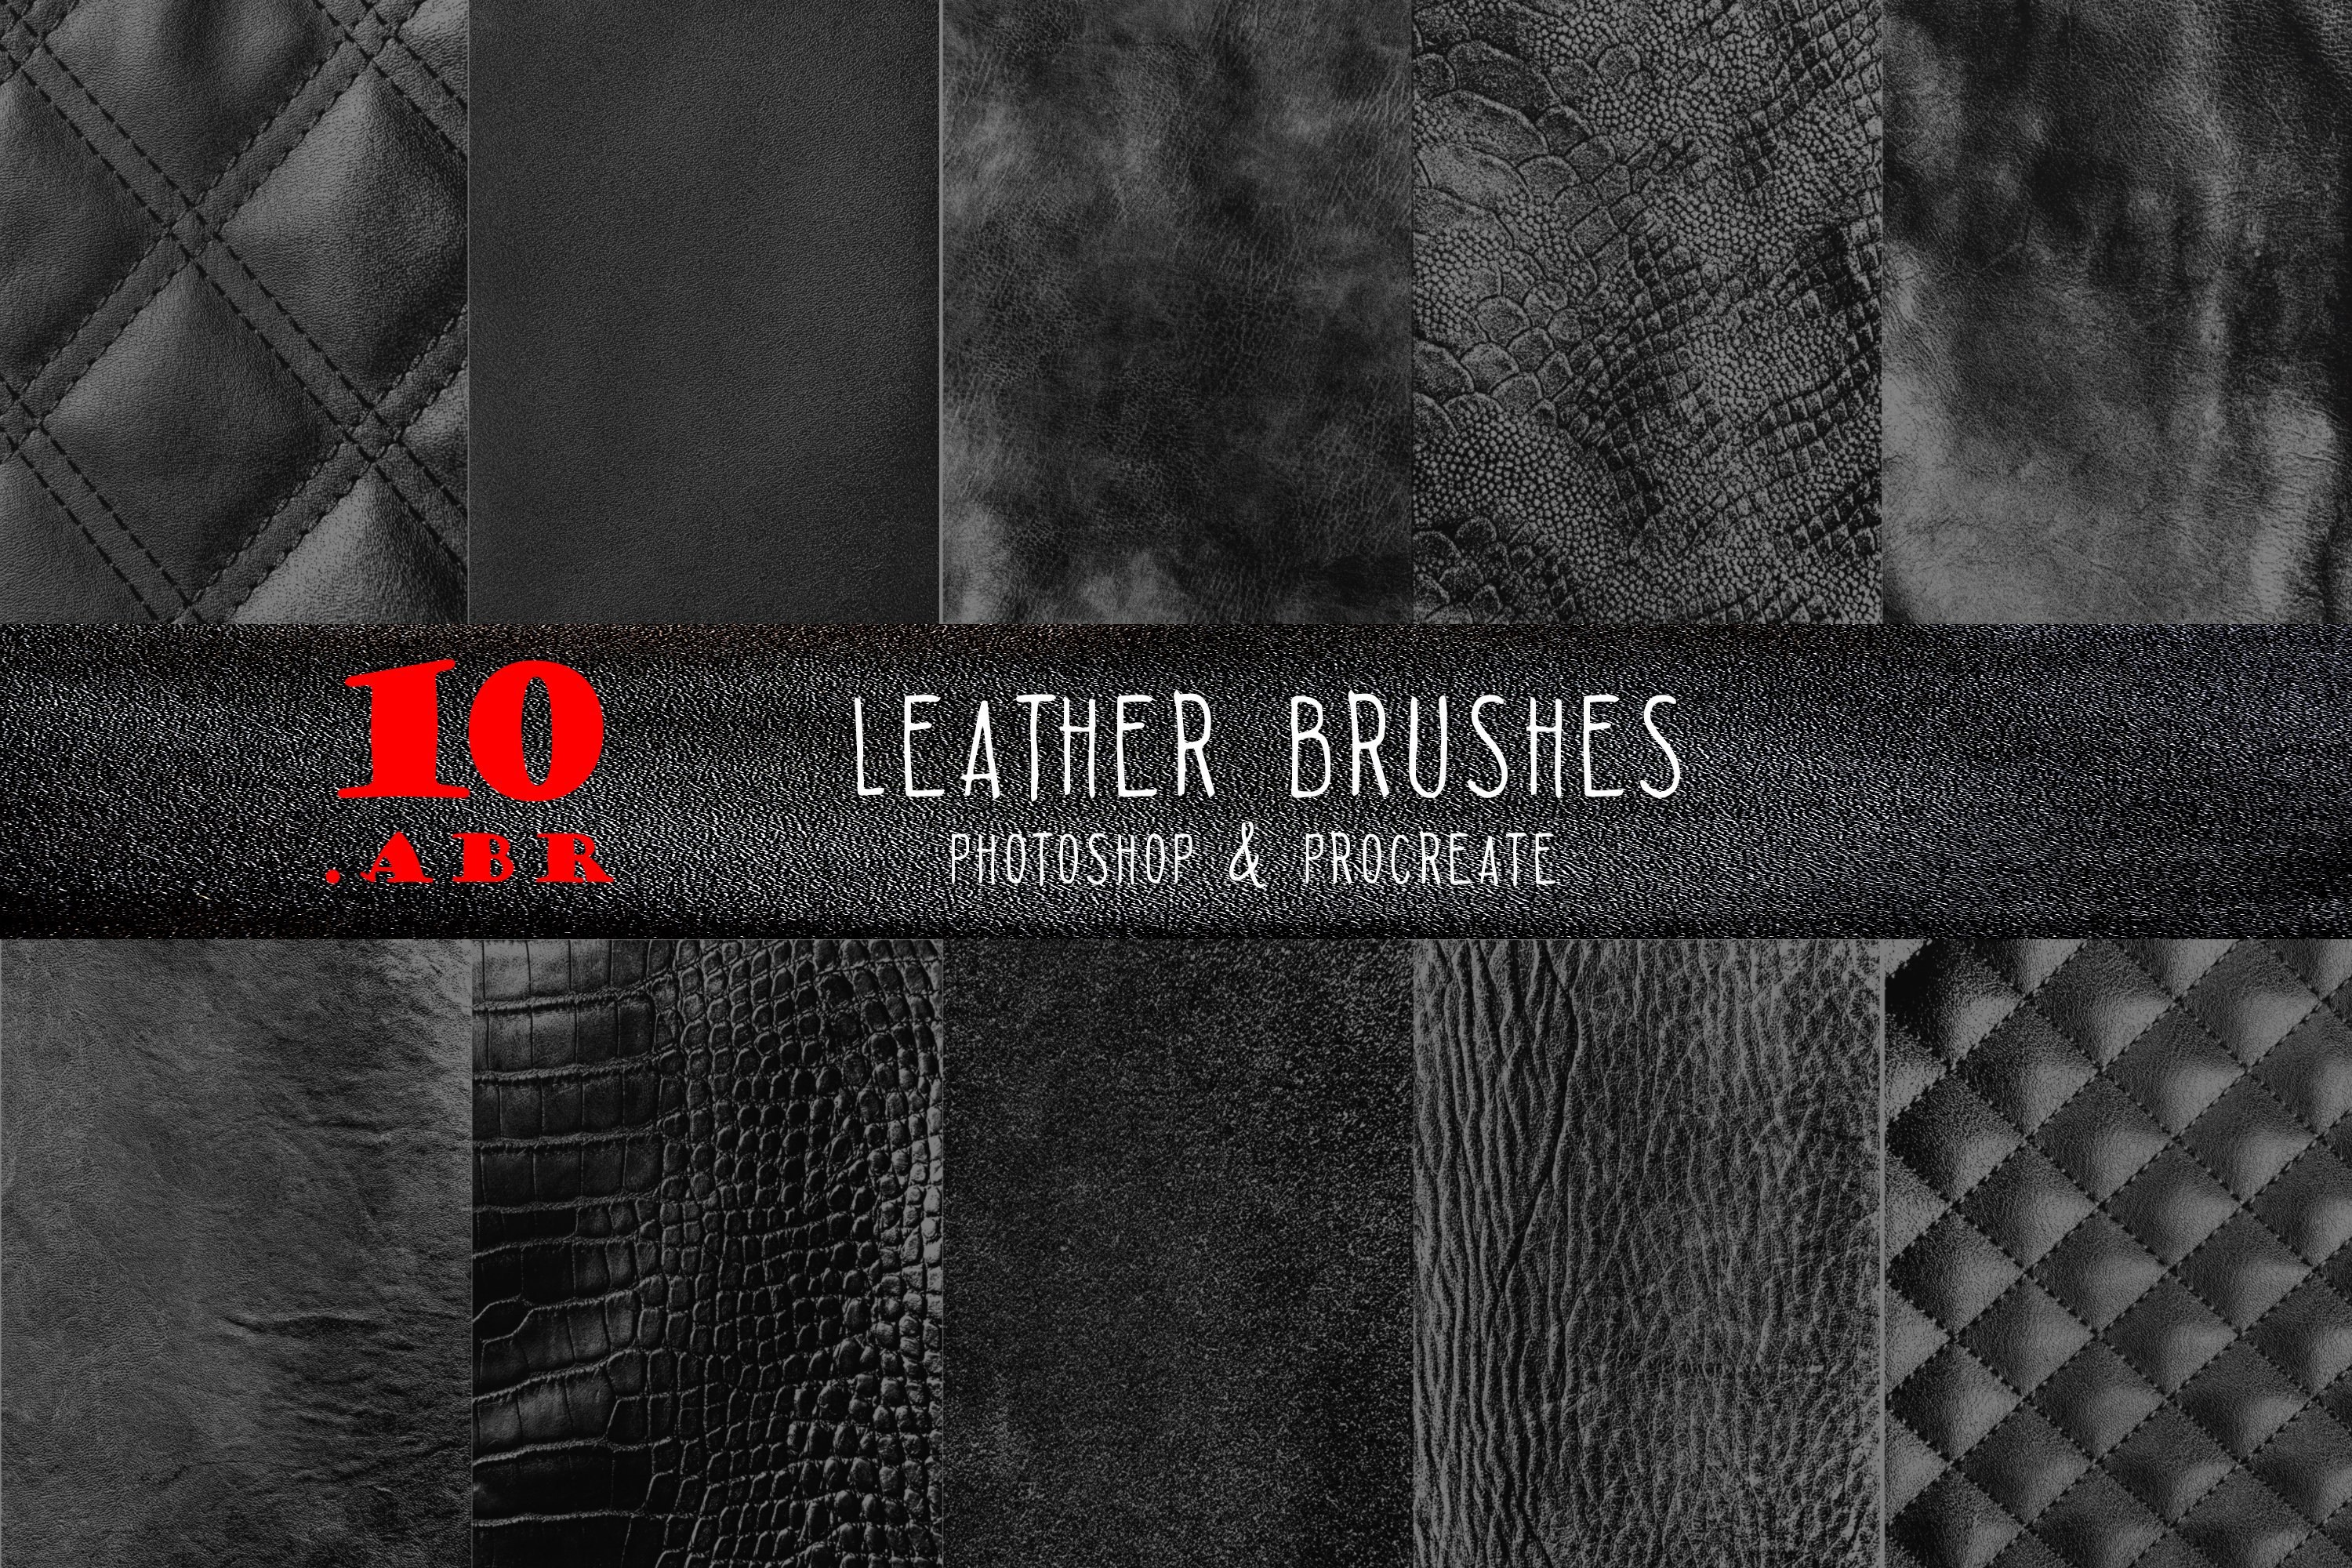 Picture of: Leather textured brushes for Photoshop & Procreate